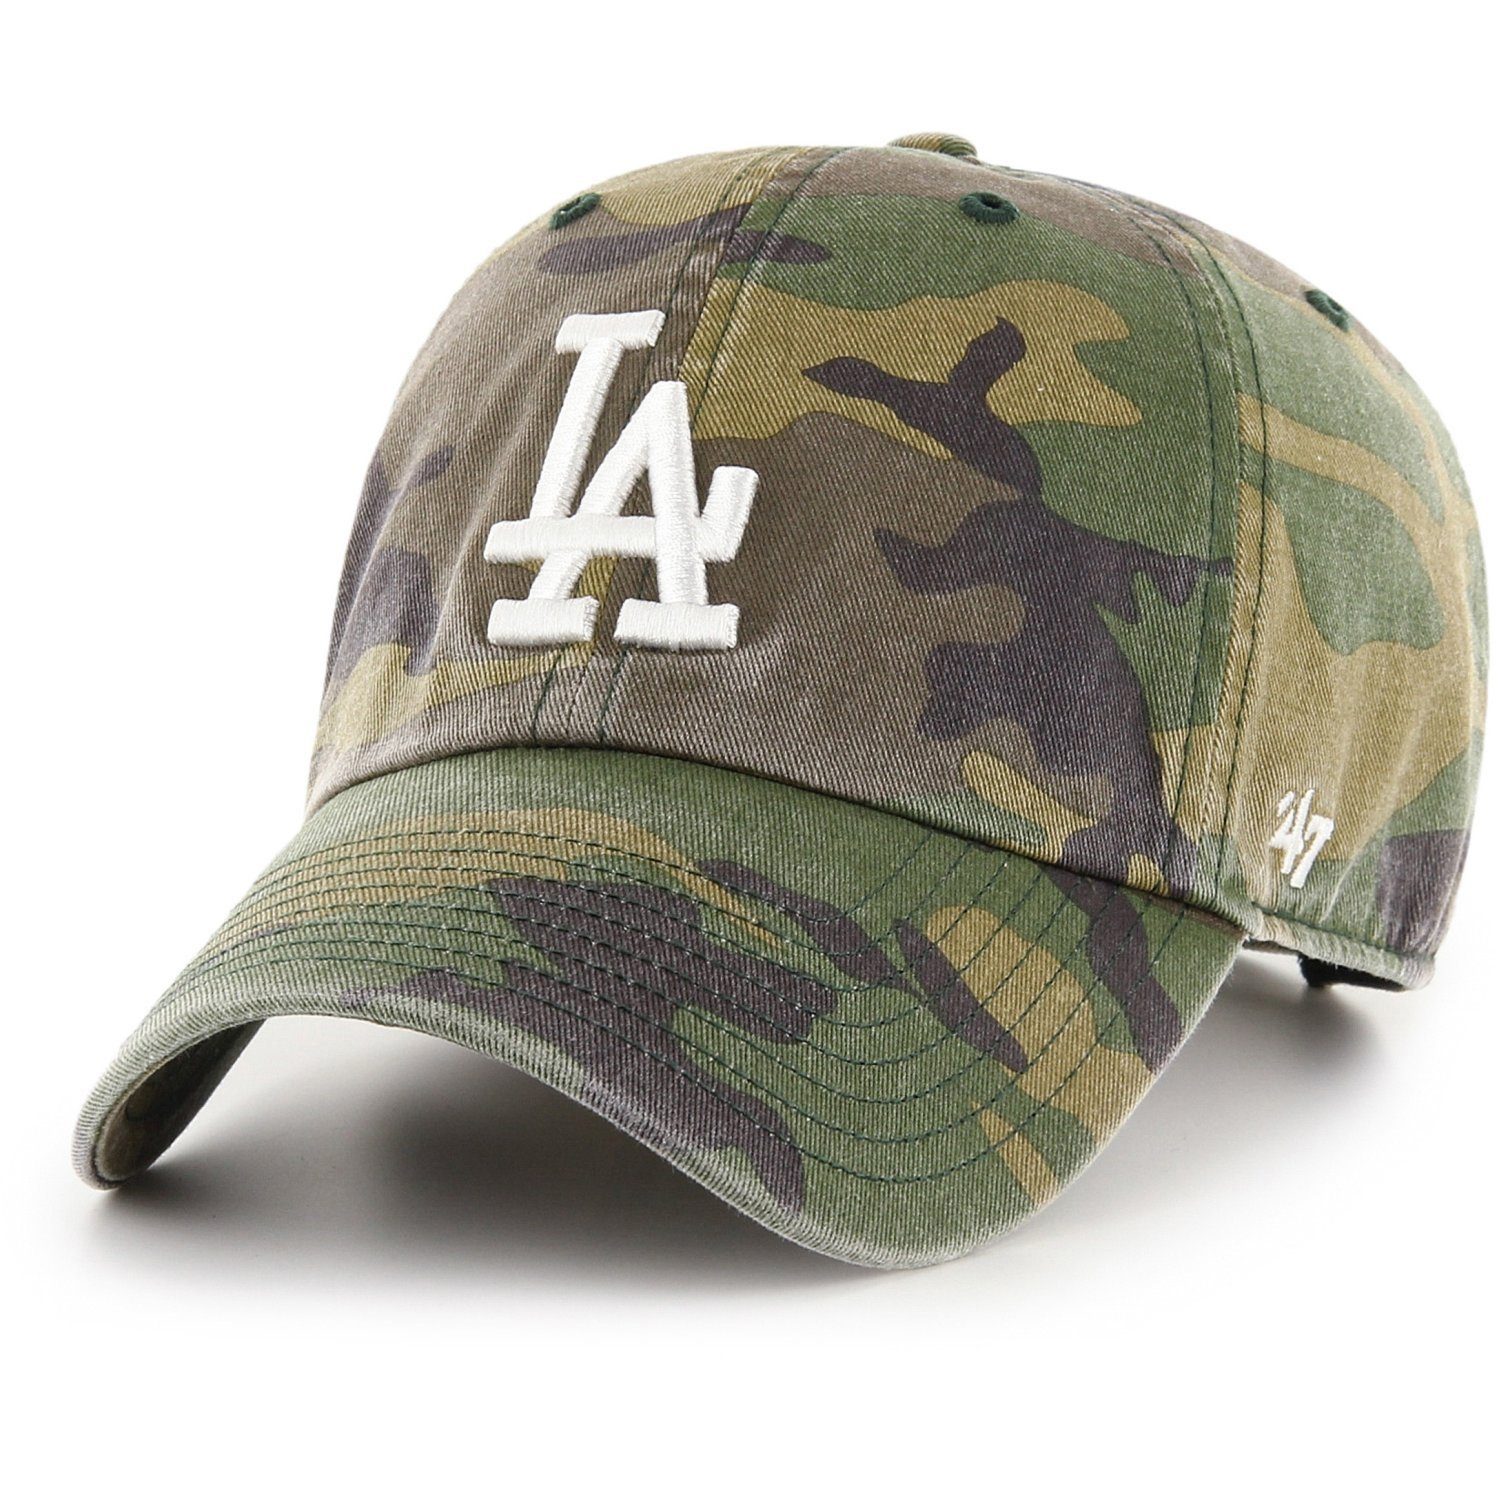 '47 Brand Baseball Cap Relaxed WASHED Los Angeles Dodgers